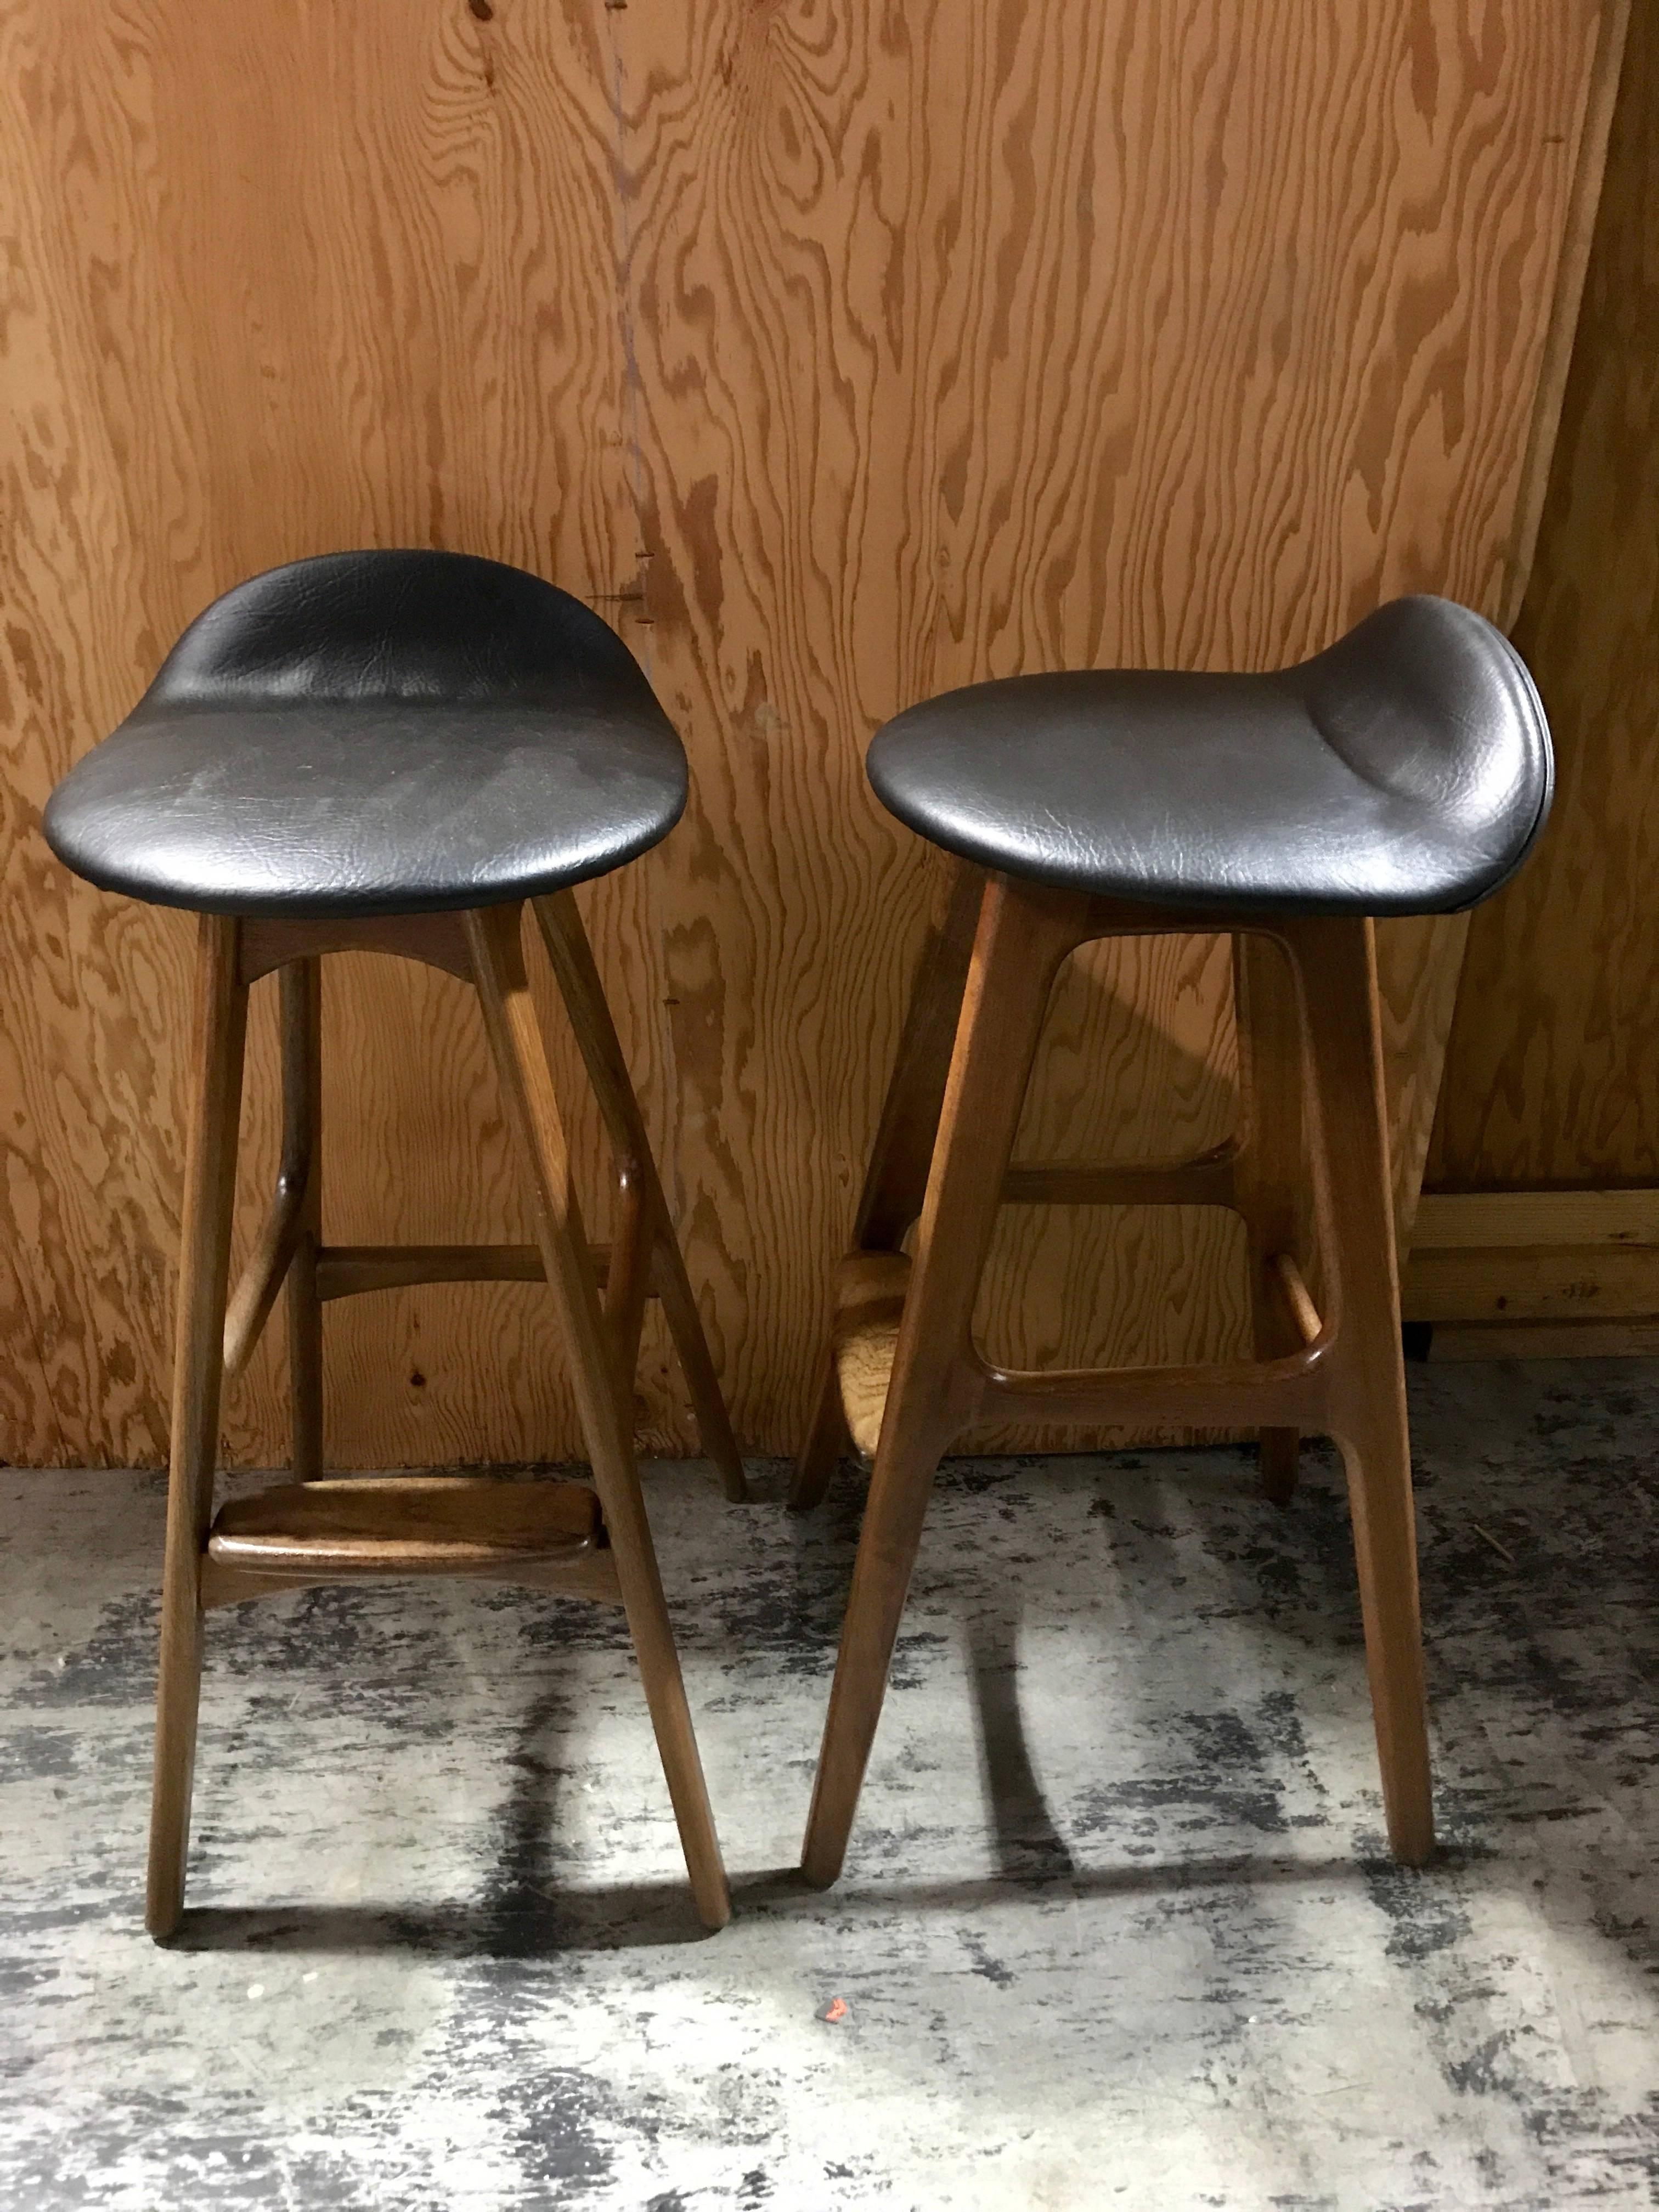 Pair of Erik Buch Barstools for O.D. Mobler, rosewood and newly upholstered Naugahyde seats. The seats measure 14.5